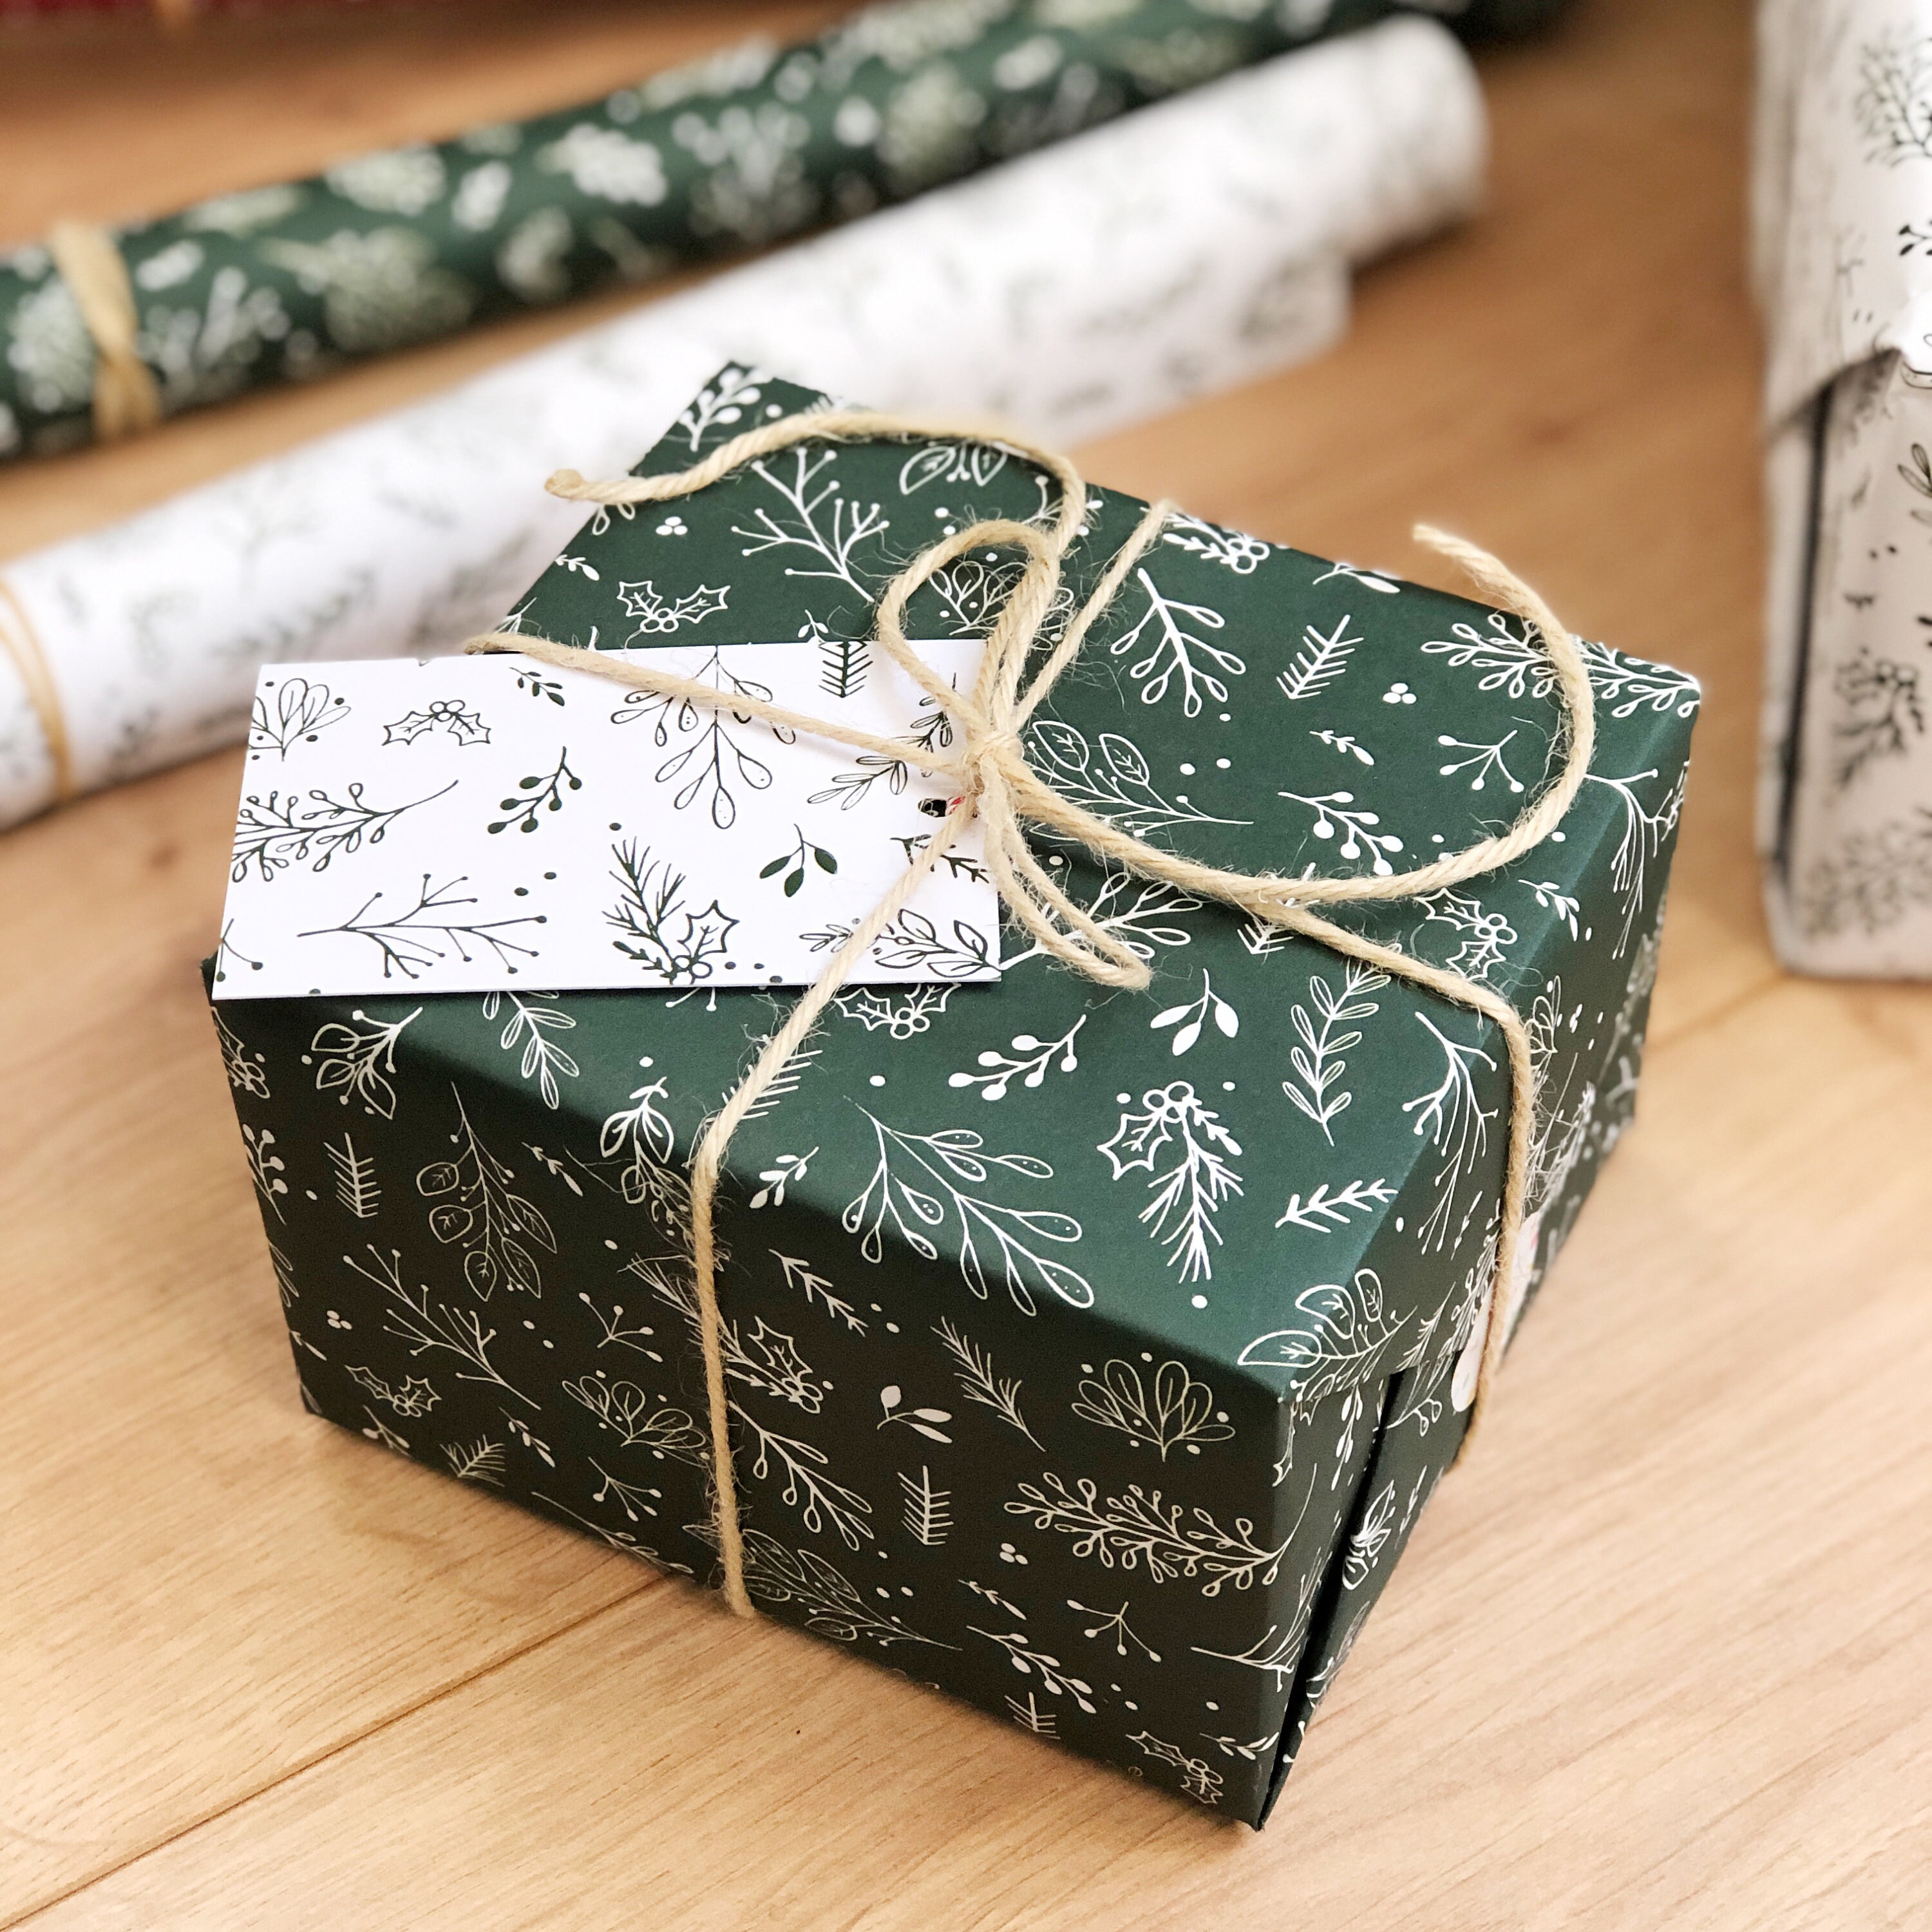 Retro Festive Knits - Recyclable Wrapping Paper & Tags – The Little Green  Wrapping Company